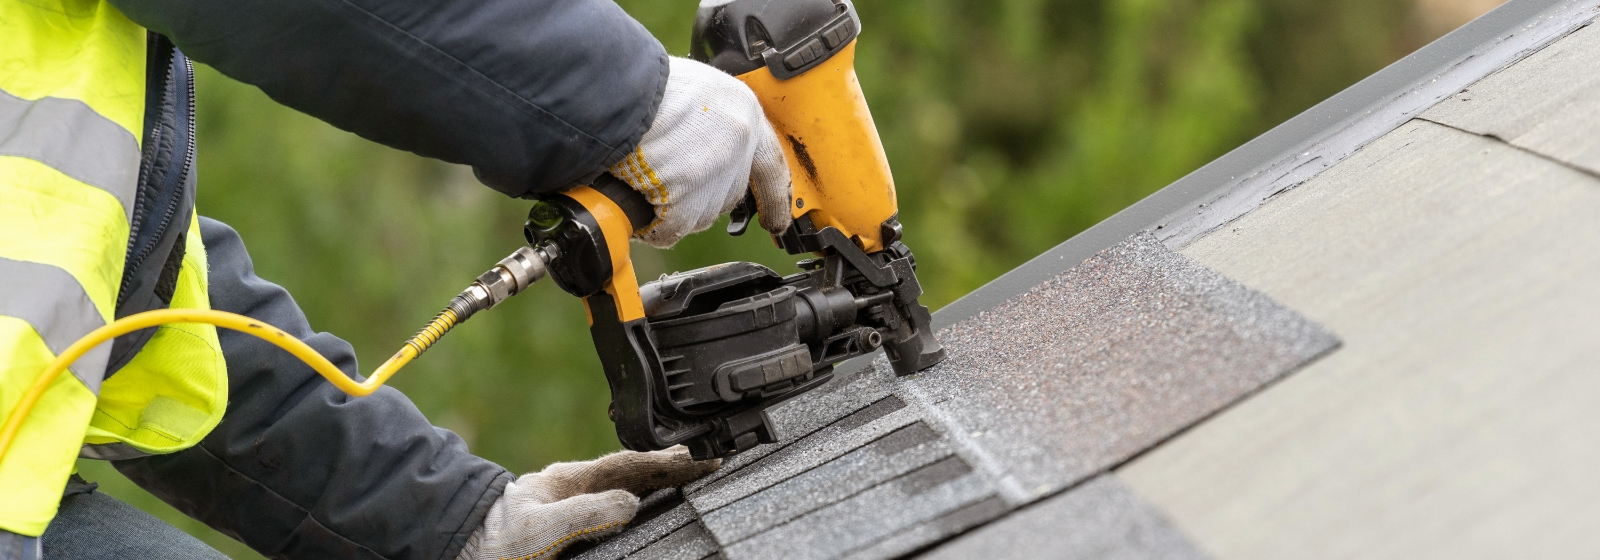 A roofer wearing a yellow vest and gloves secures shingles on a full roof replacement with a nail gun.